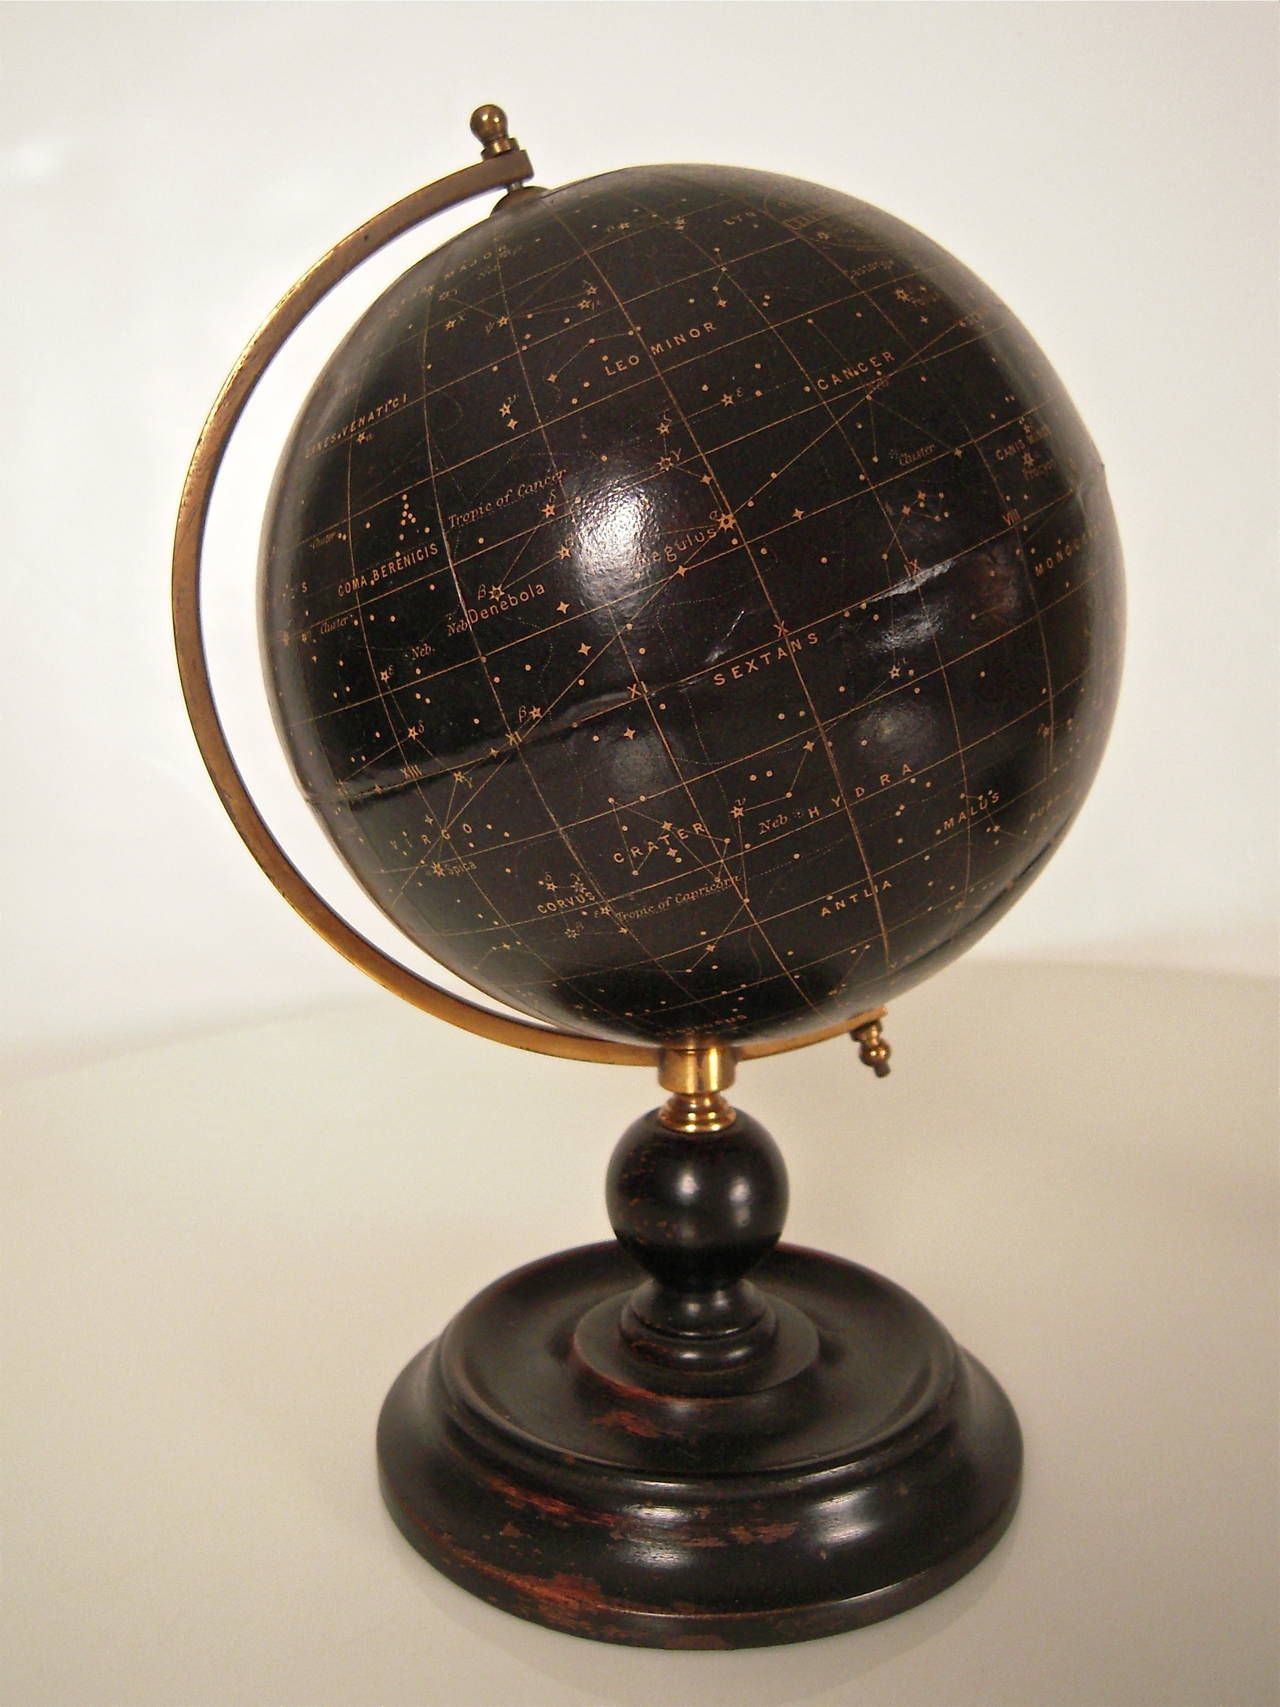 An unusual pair of small English, 6 inch celestial and terrestrial globes by George Philip & Son, London, early 20th century, both with twelve colored printed gores, uncalibrated lacquered brass half meridian ring, resting on similar ebonized